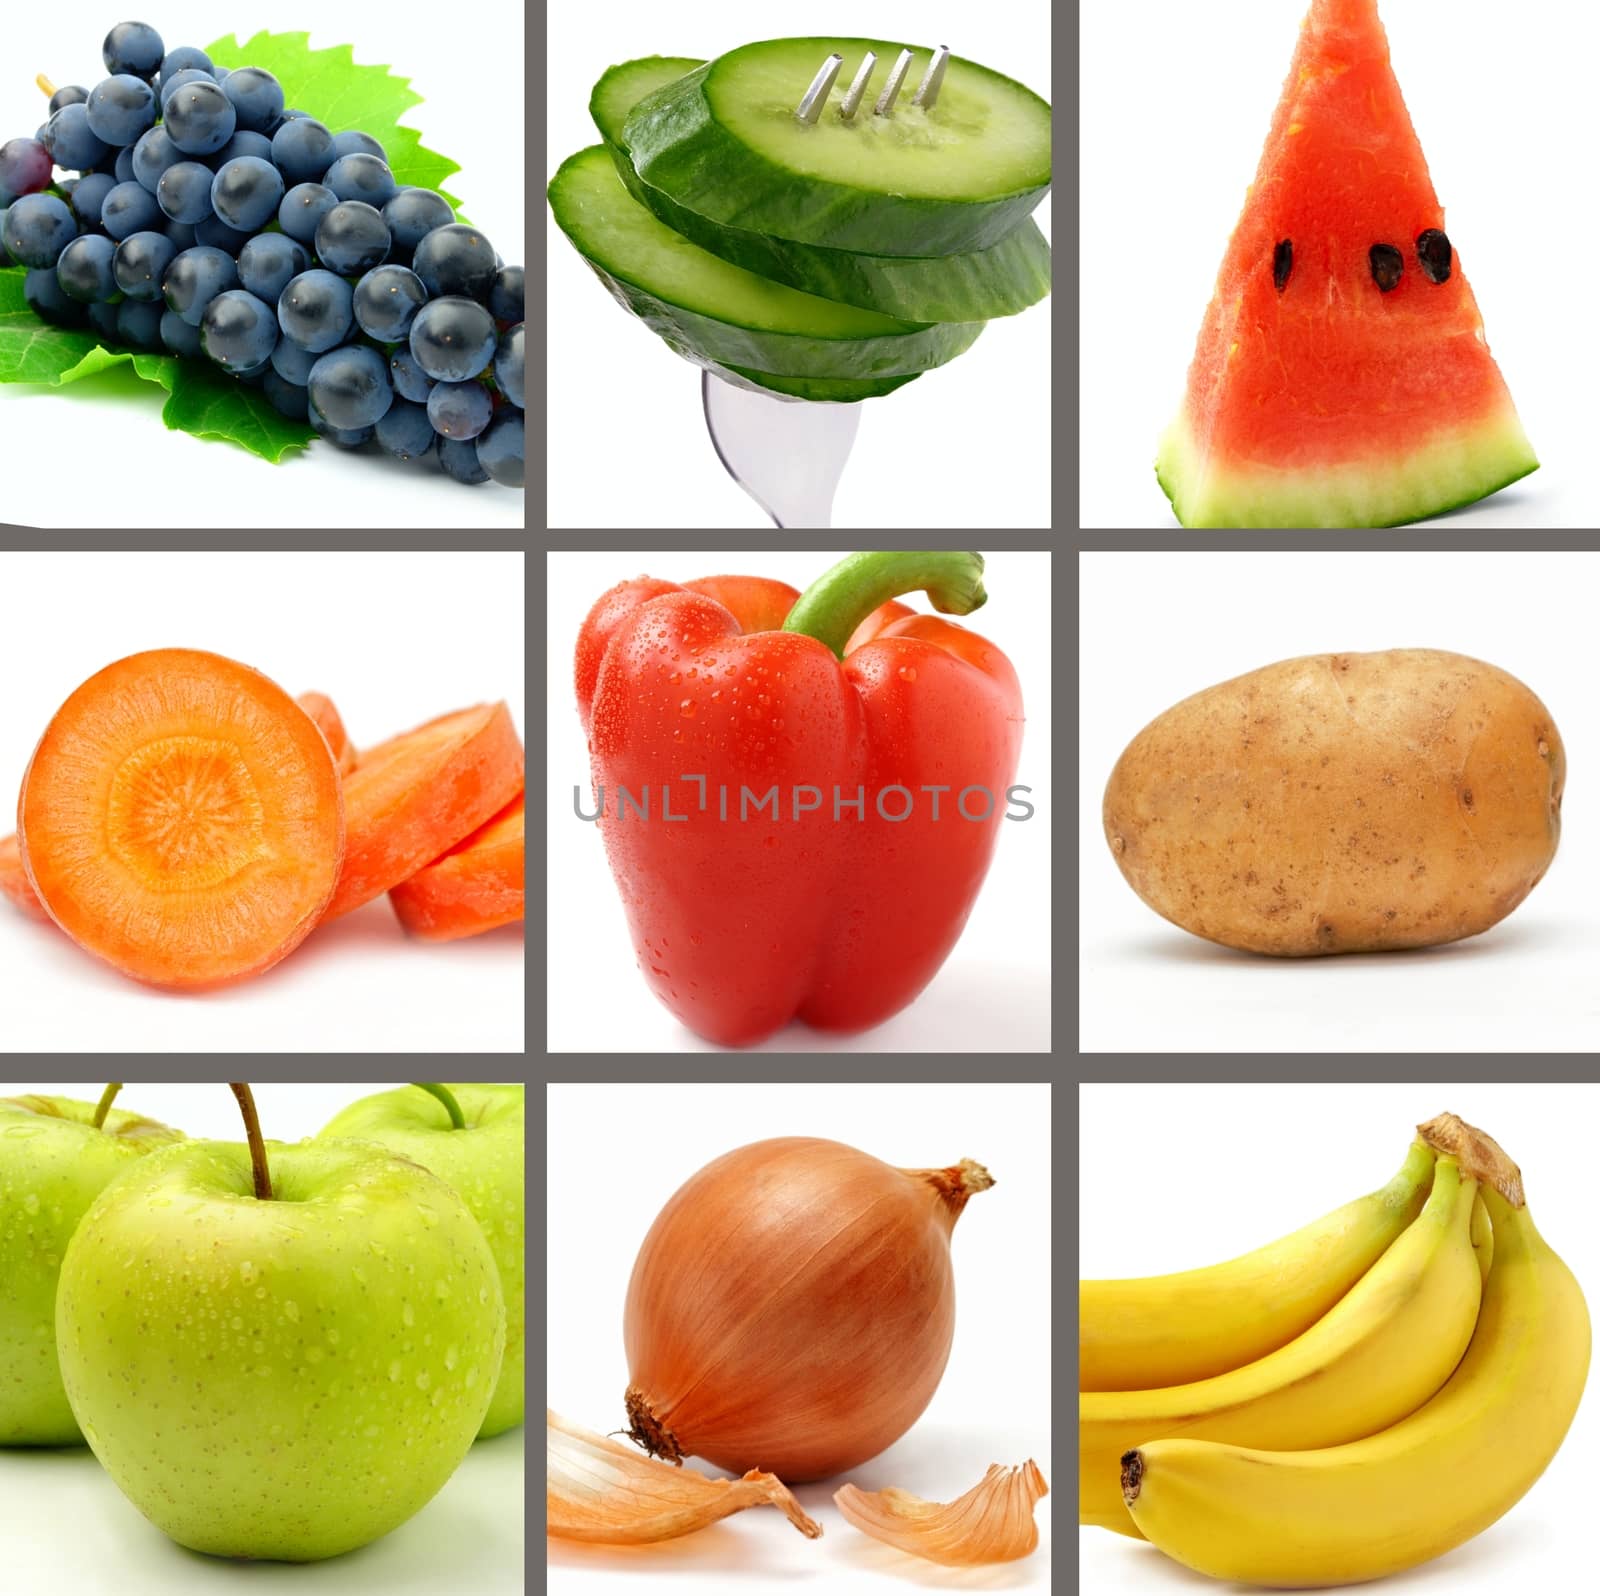 set of bright and juicy fruits and vegetables on a white background